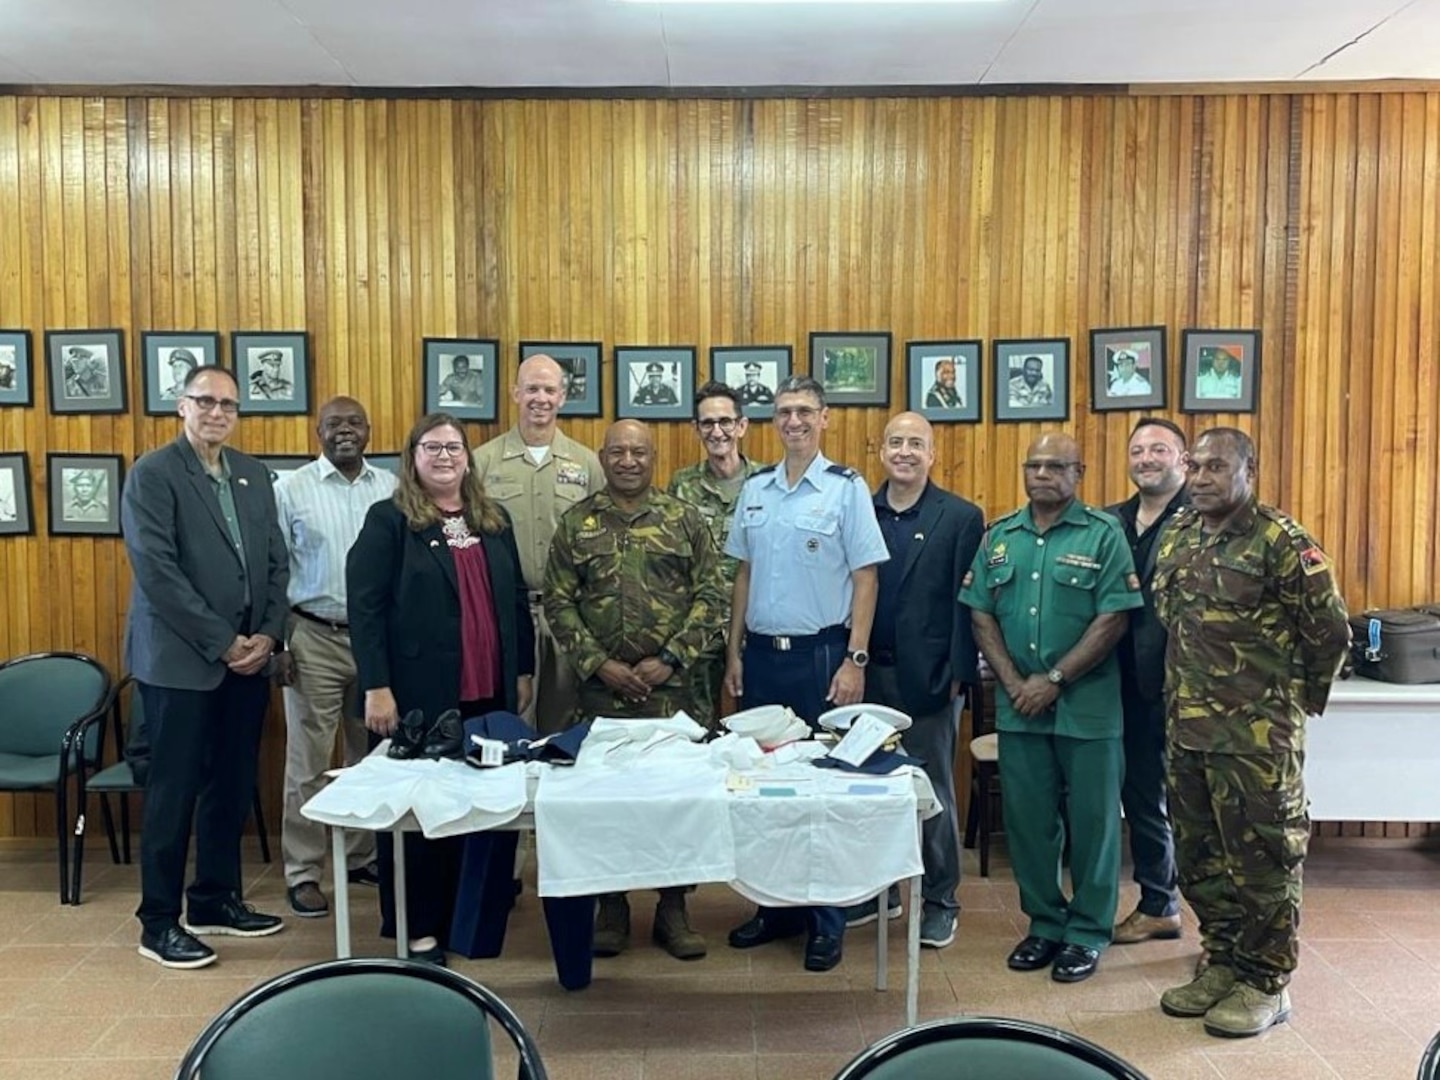 military and civilian men and women pose behind table of uniforms